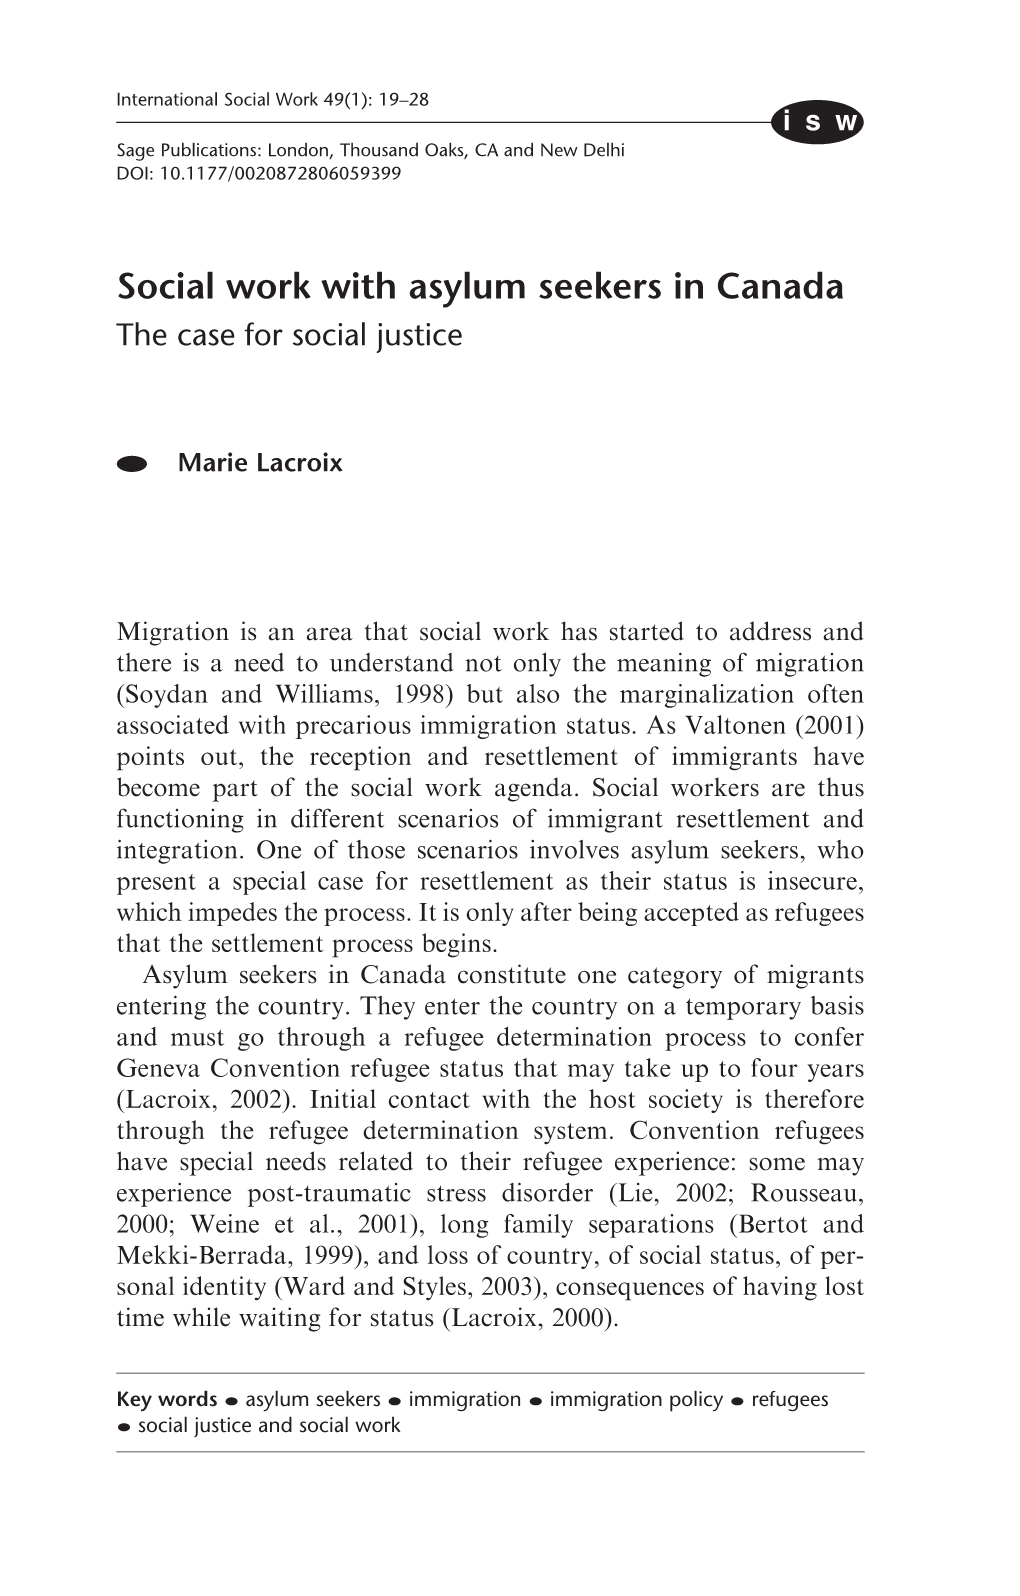 Social Work with Asylum Seekers in Canada the Case for Social Justice